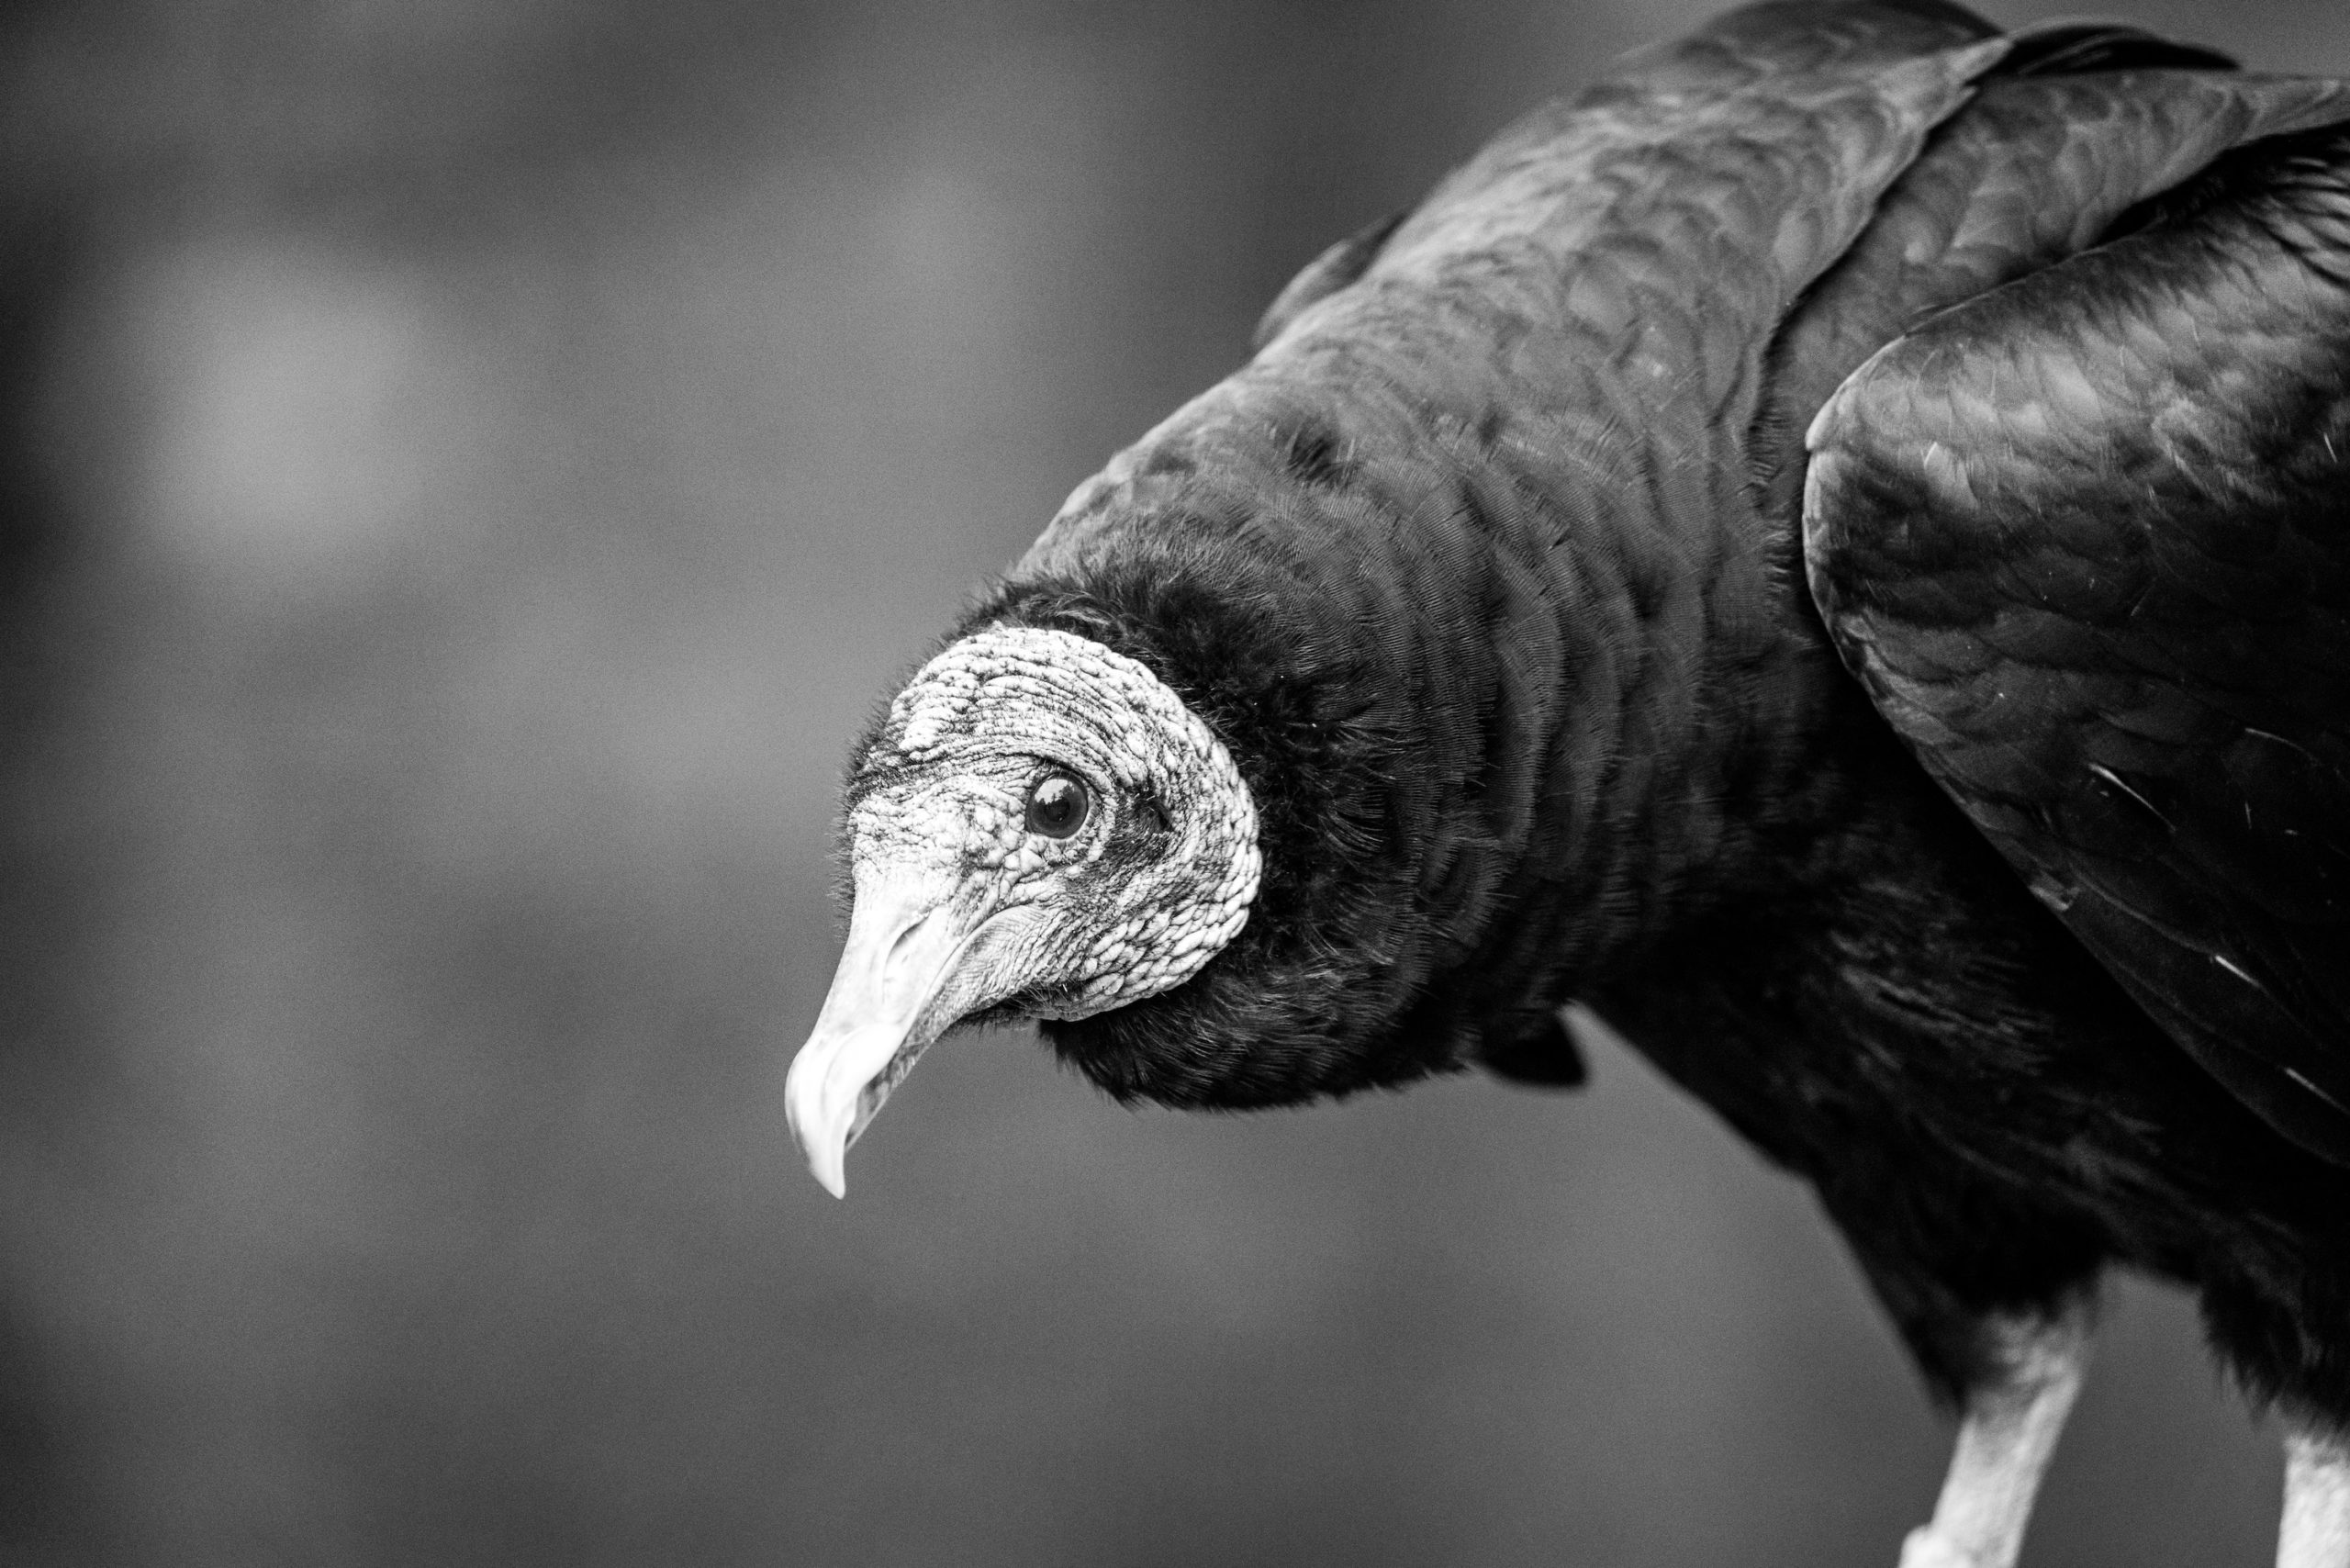 Curly the Vulture